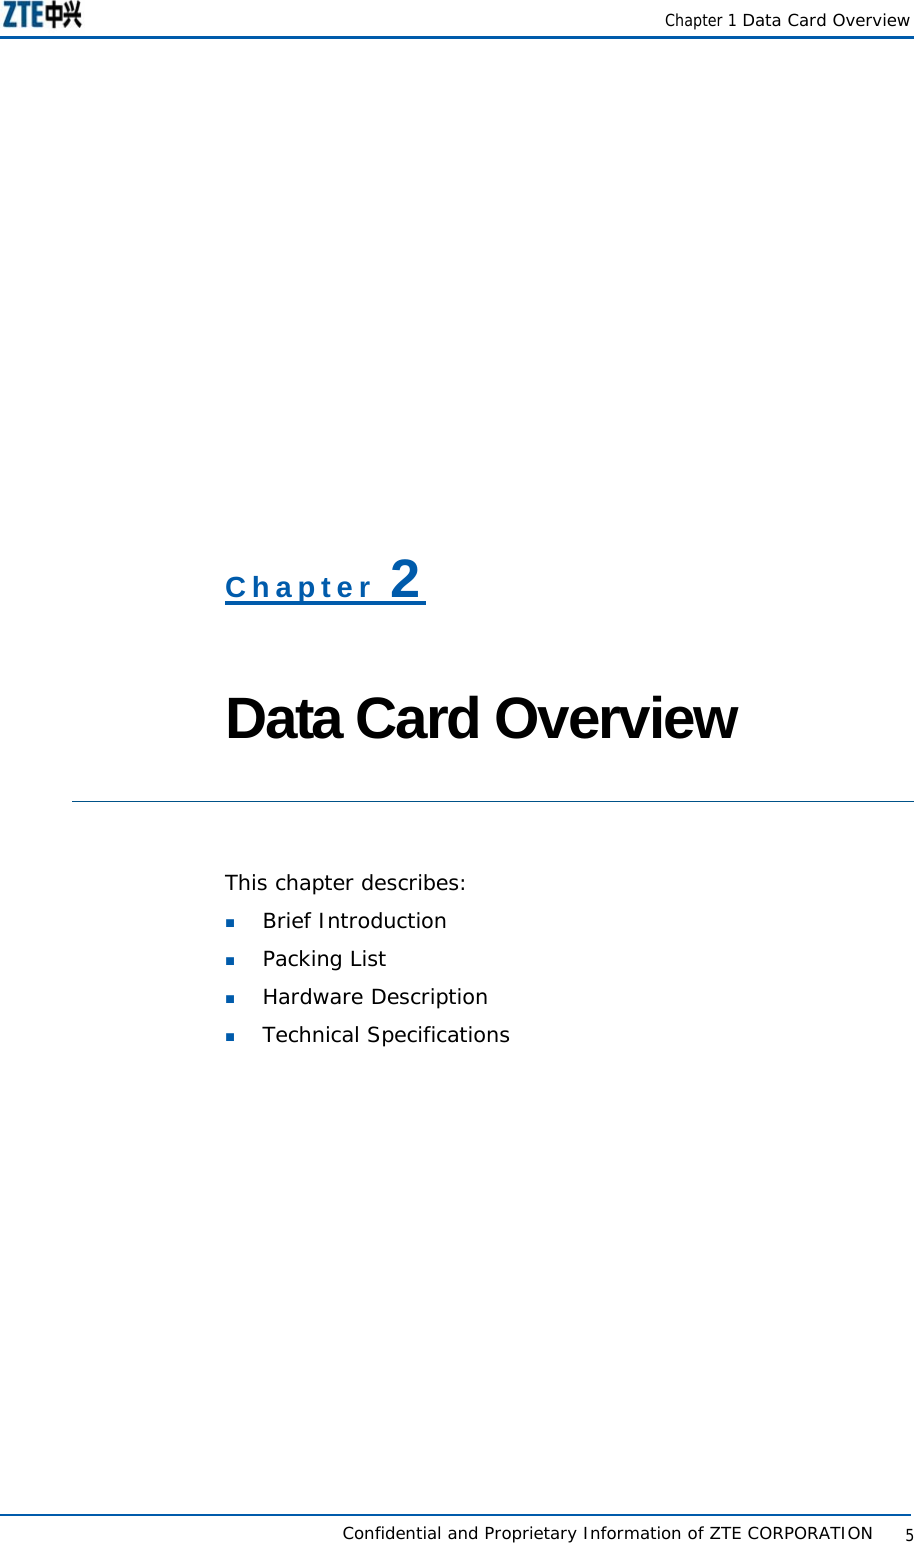   Chapter 1 Data Card Overview   Confidential and Proprietary Information of ZTE CORPORATION           5Chapter 2  Data Card Overview  This chapter describes:   Brief Introduction  Packing List  Hardware Description  Technical Specifications 